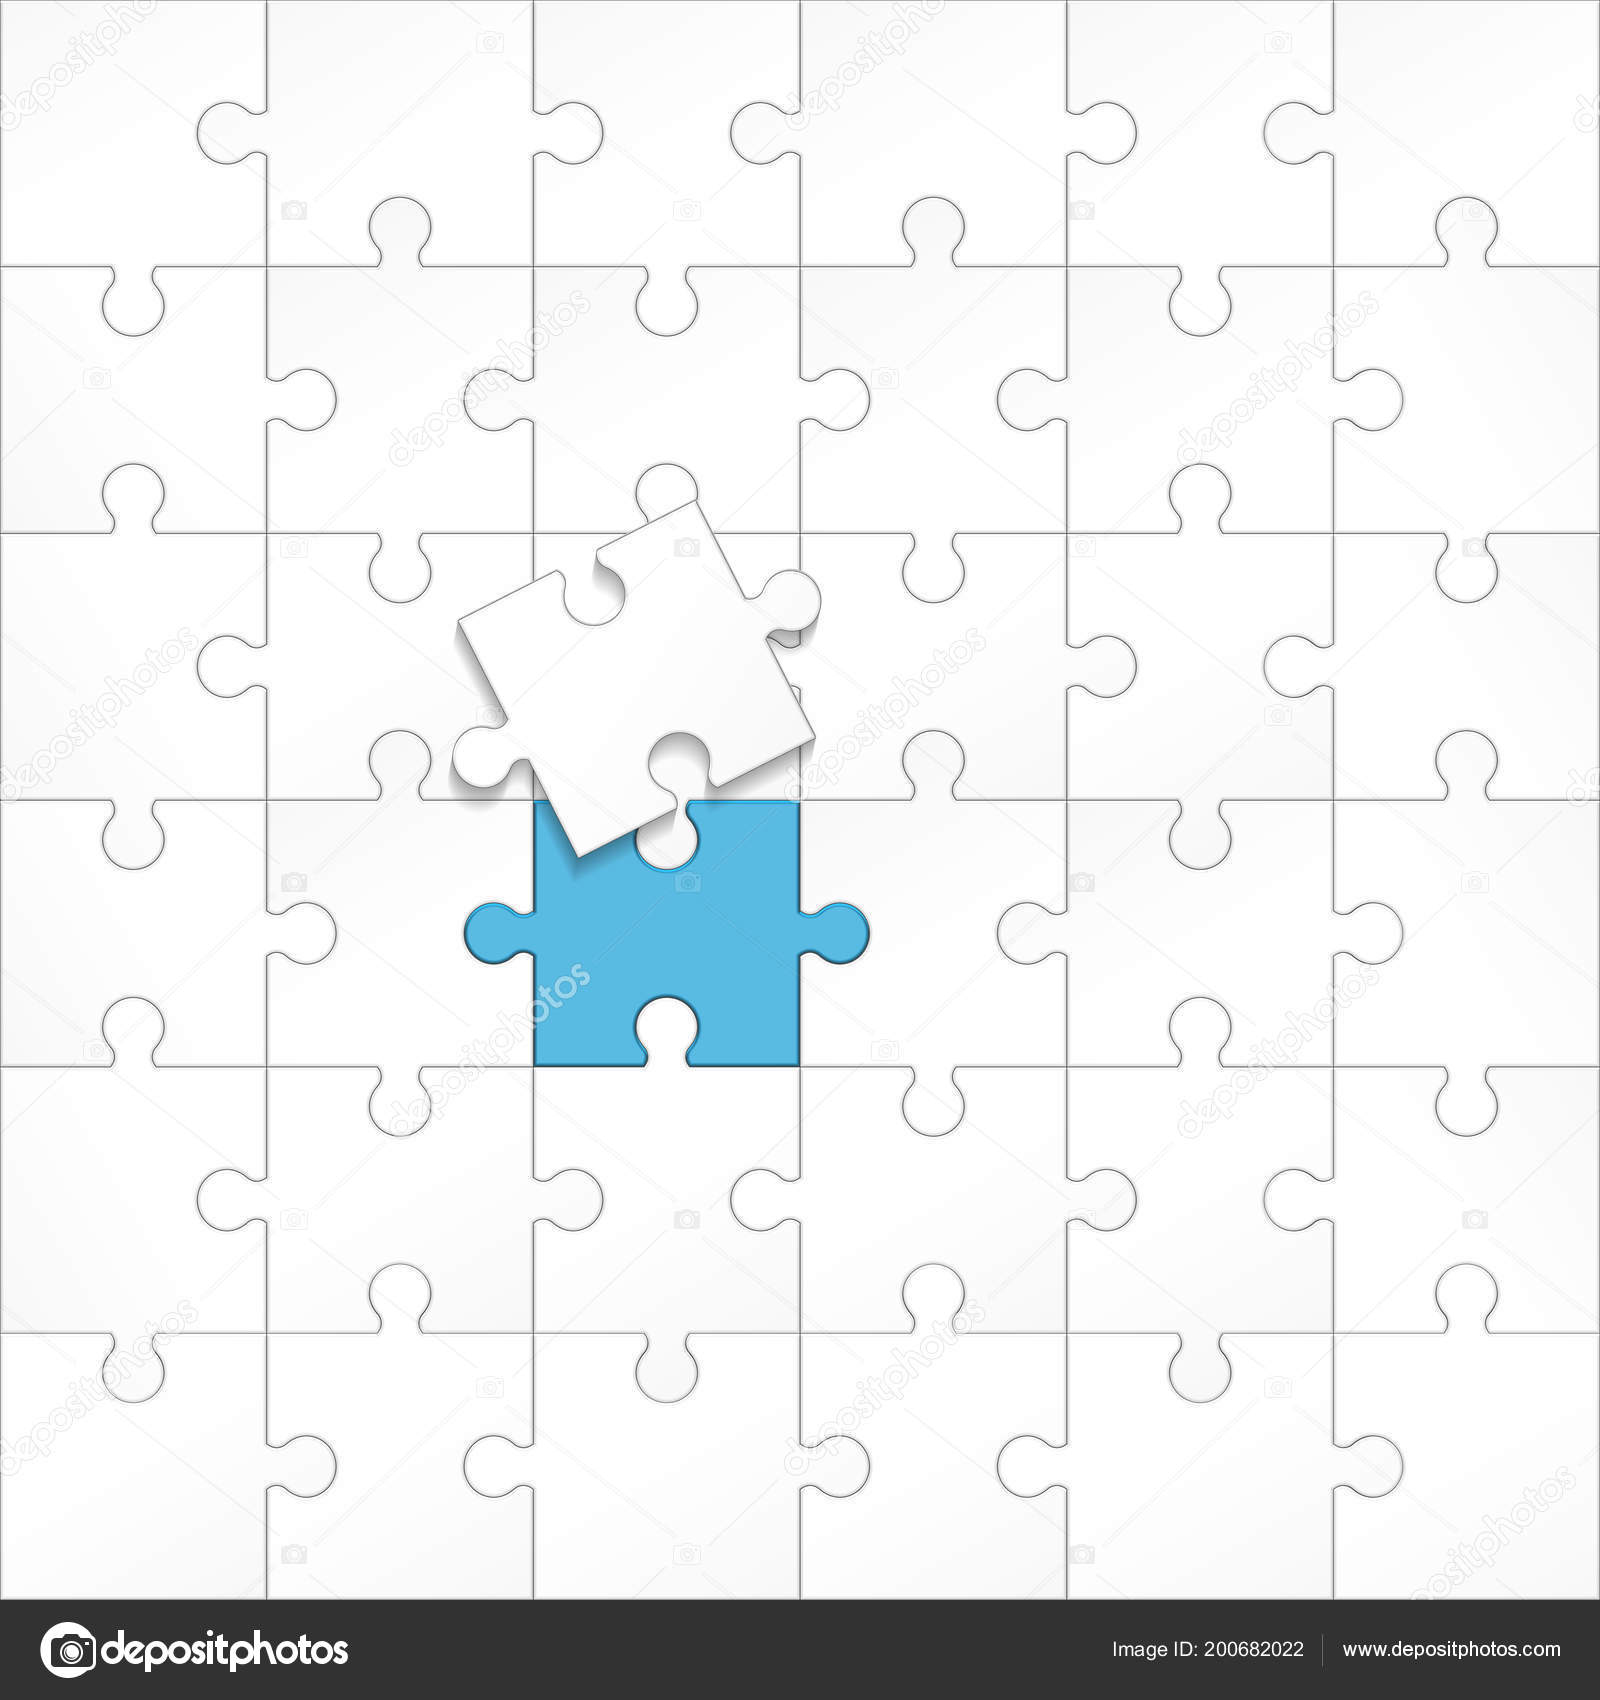 Download Creative Vector Illustration Of Jigsaw Puzzle Pieces Background Business Concept Art Design Blank Mockup Template Abstract Graphic Seamless Mosaic Element Stock Vector Image By C Mikhail Grachikov 200682022